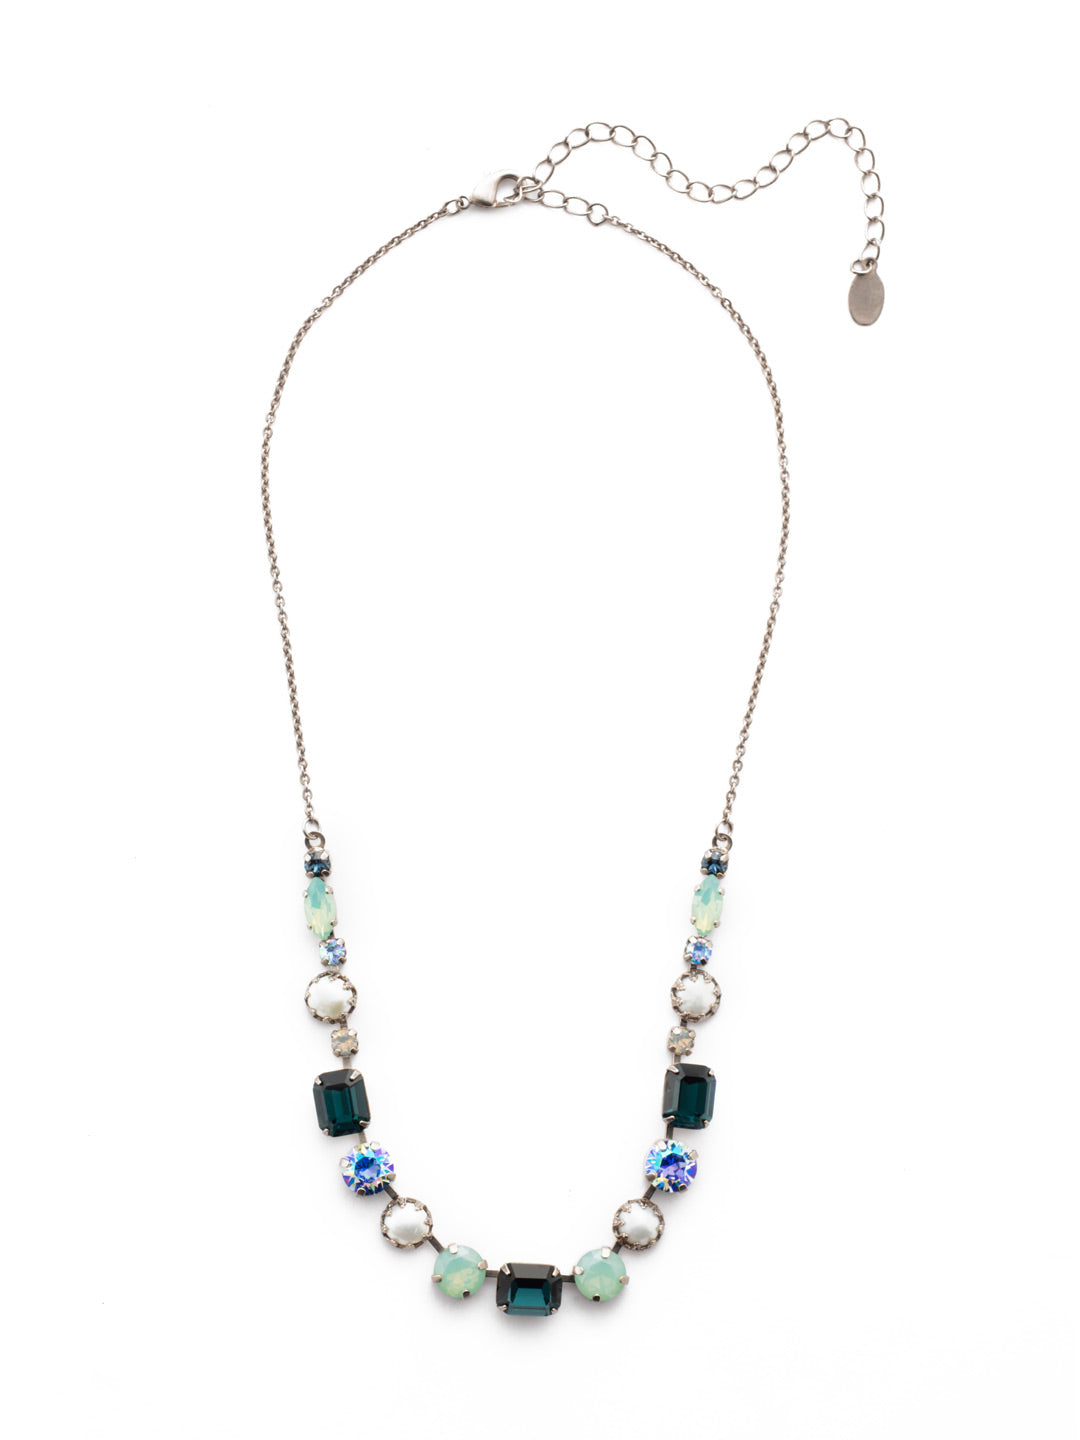 Deandra Tennis Necklace - NES10ASNFT - The Deandra Tennis Necklace is classic style personified: showcasing pretty pearls, opaque gems and sparkling cushion crystals. From Sorrelli's Night Frost collection in our Antique Silver-tone finish.